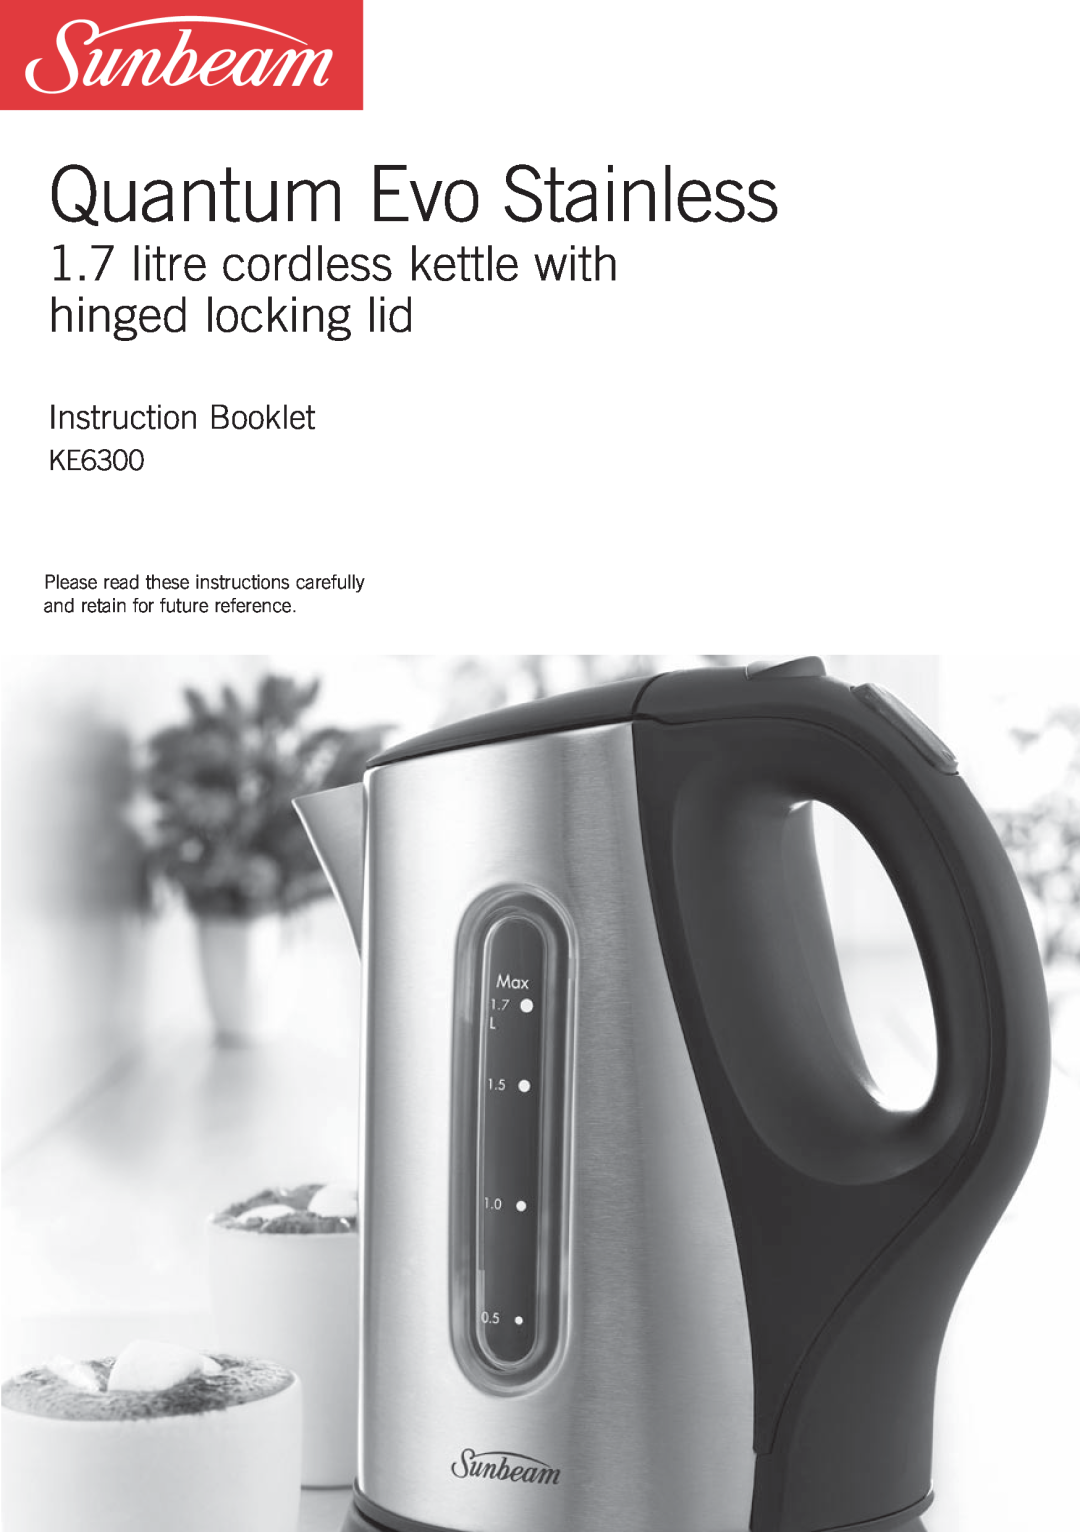 Sunbeam KE6300 manual Quantum Evo Stainless, 1.7litre cordless kettle with hinged locking lid, Instruction Booklet 